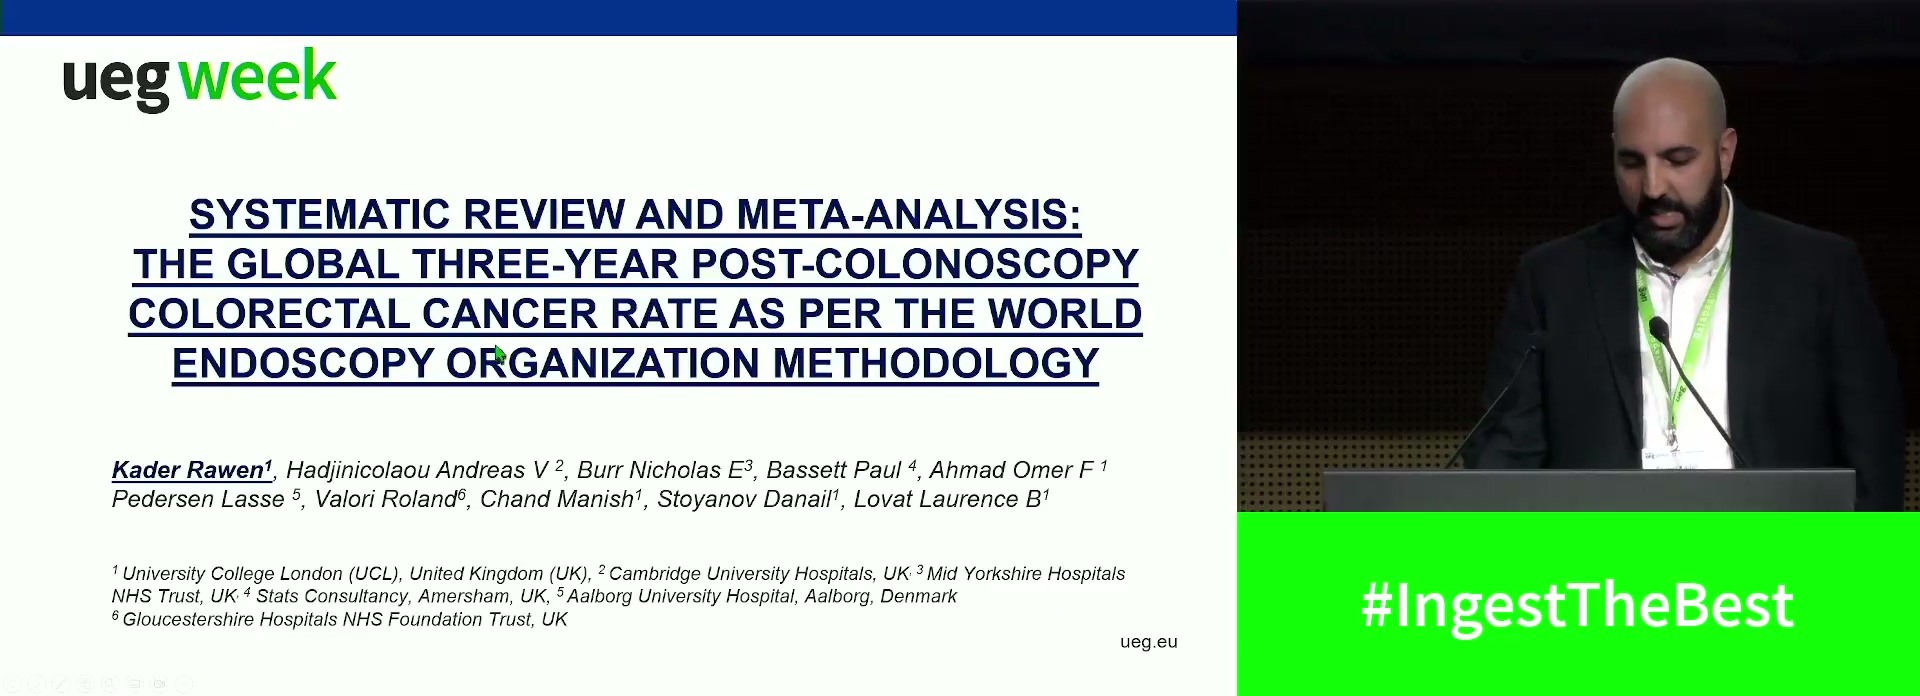 SYSTEMATIC REVIEW AND META-ANALYSIS: THE GLOBAL THREE-YEAR POST-COLONOSCOPY COLORECTAL CANCER RATE AS PER THE WORLD ENDOSCOPY ORGANIZATION METHODOLOGY